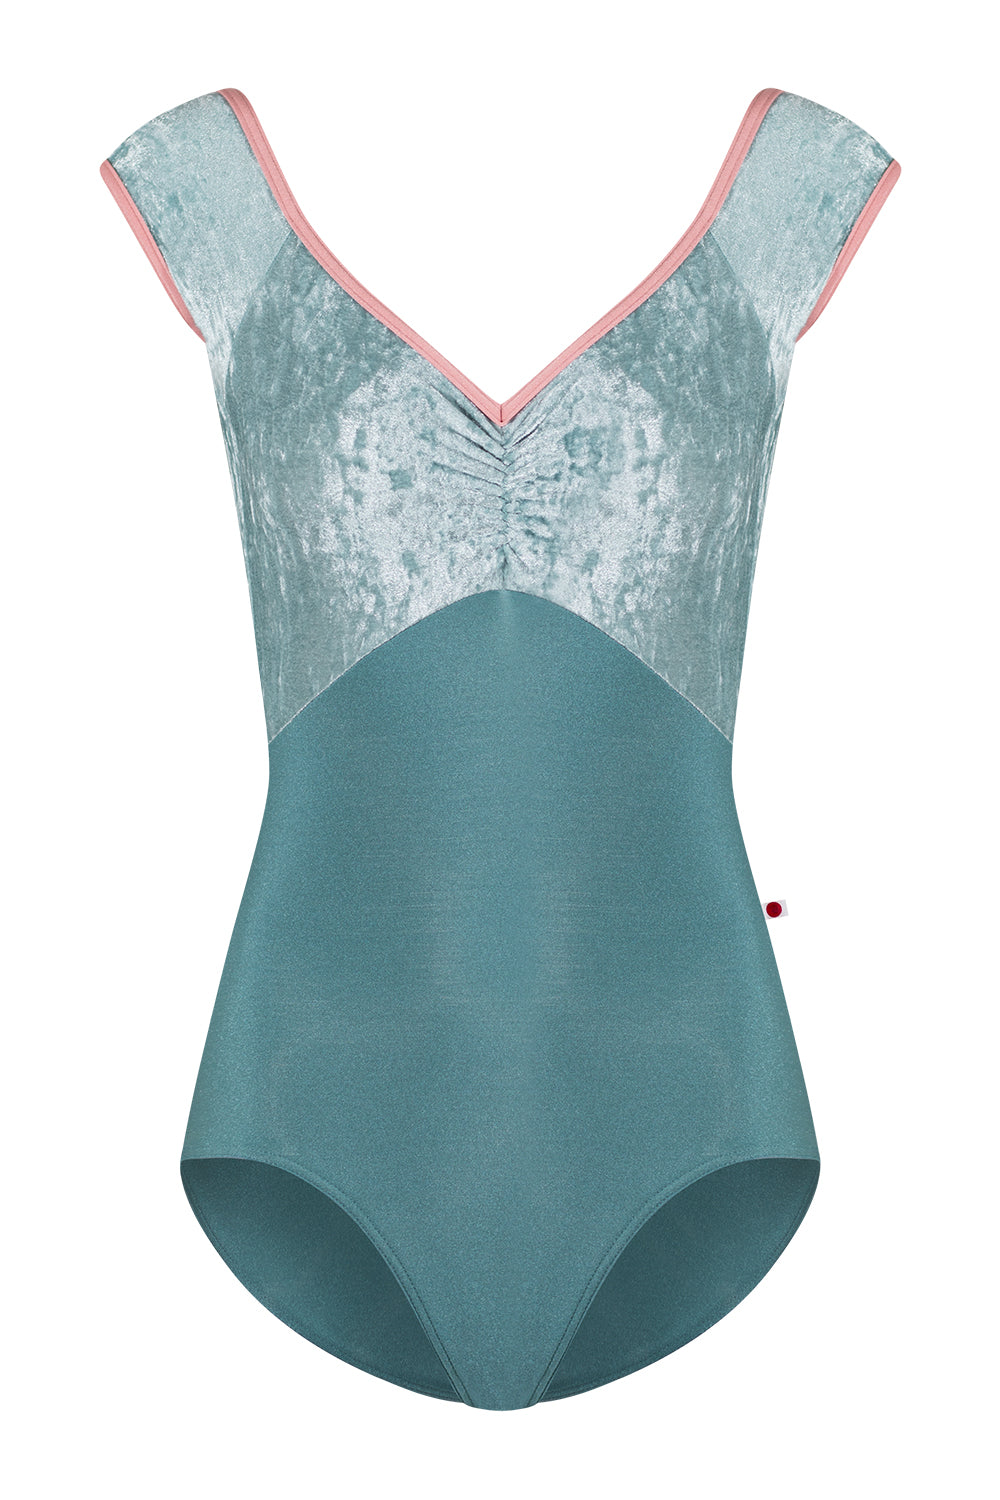 Yumiko Elli Leotard in Frost and Ice 015